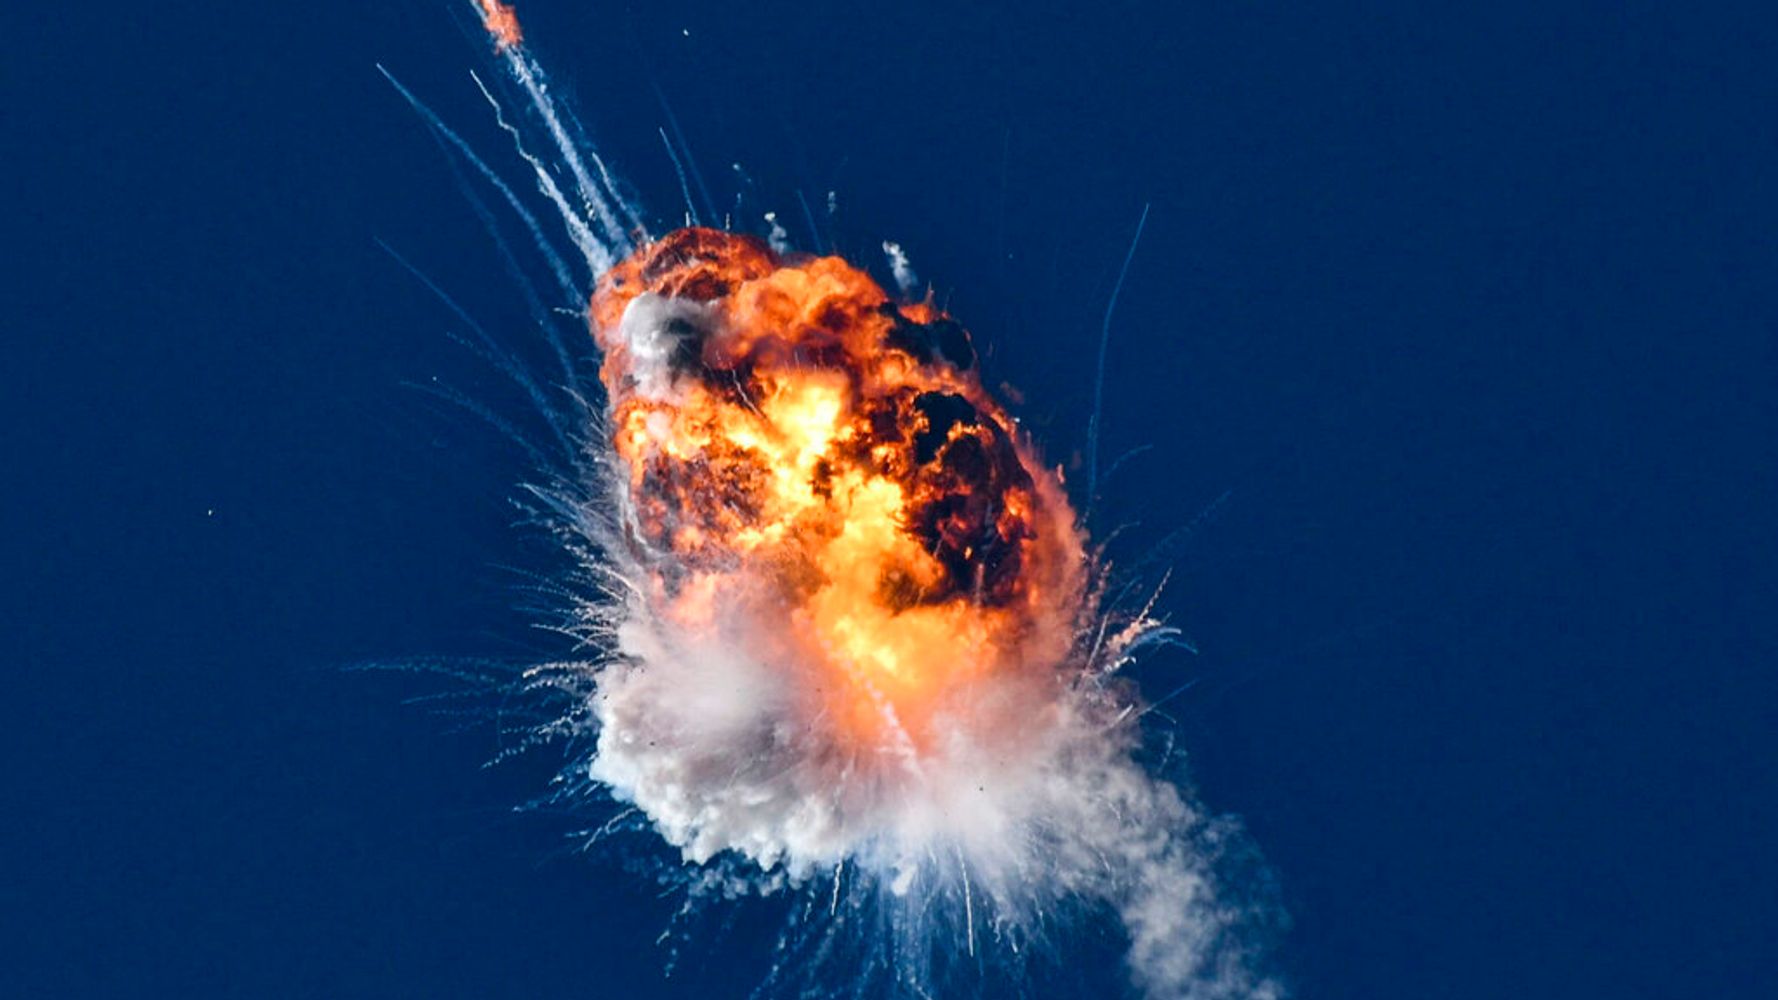 Rocket ‘Terminated’ In Fiery Explosion Over Pacific Ocean